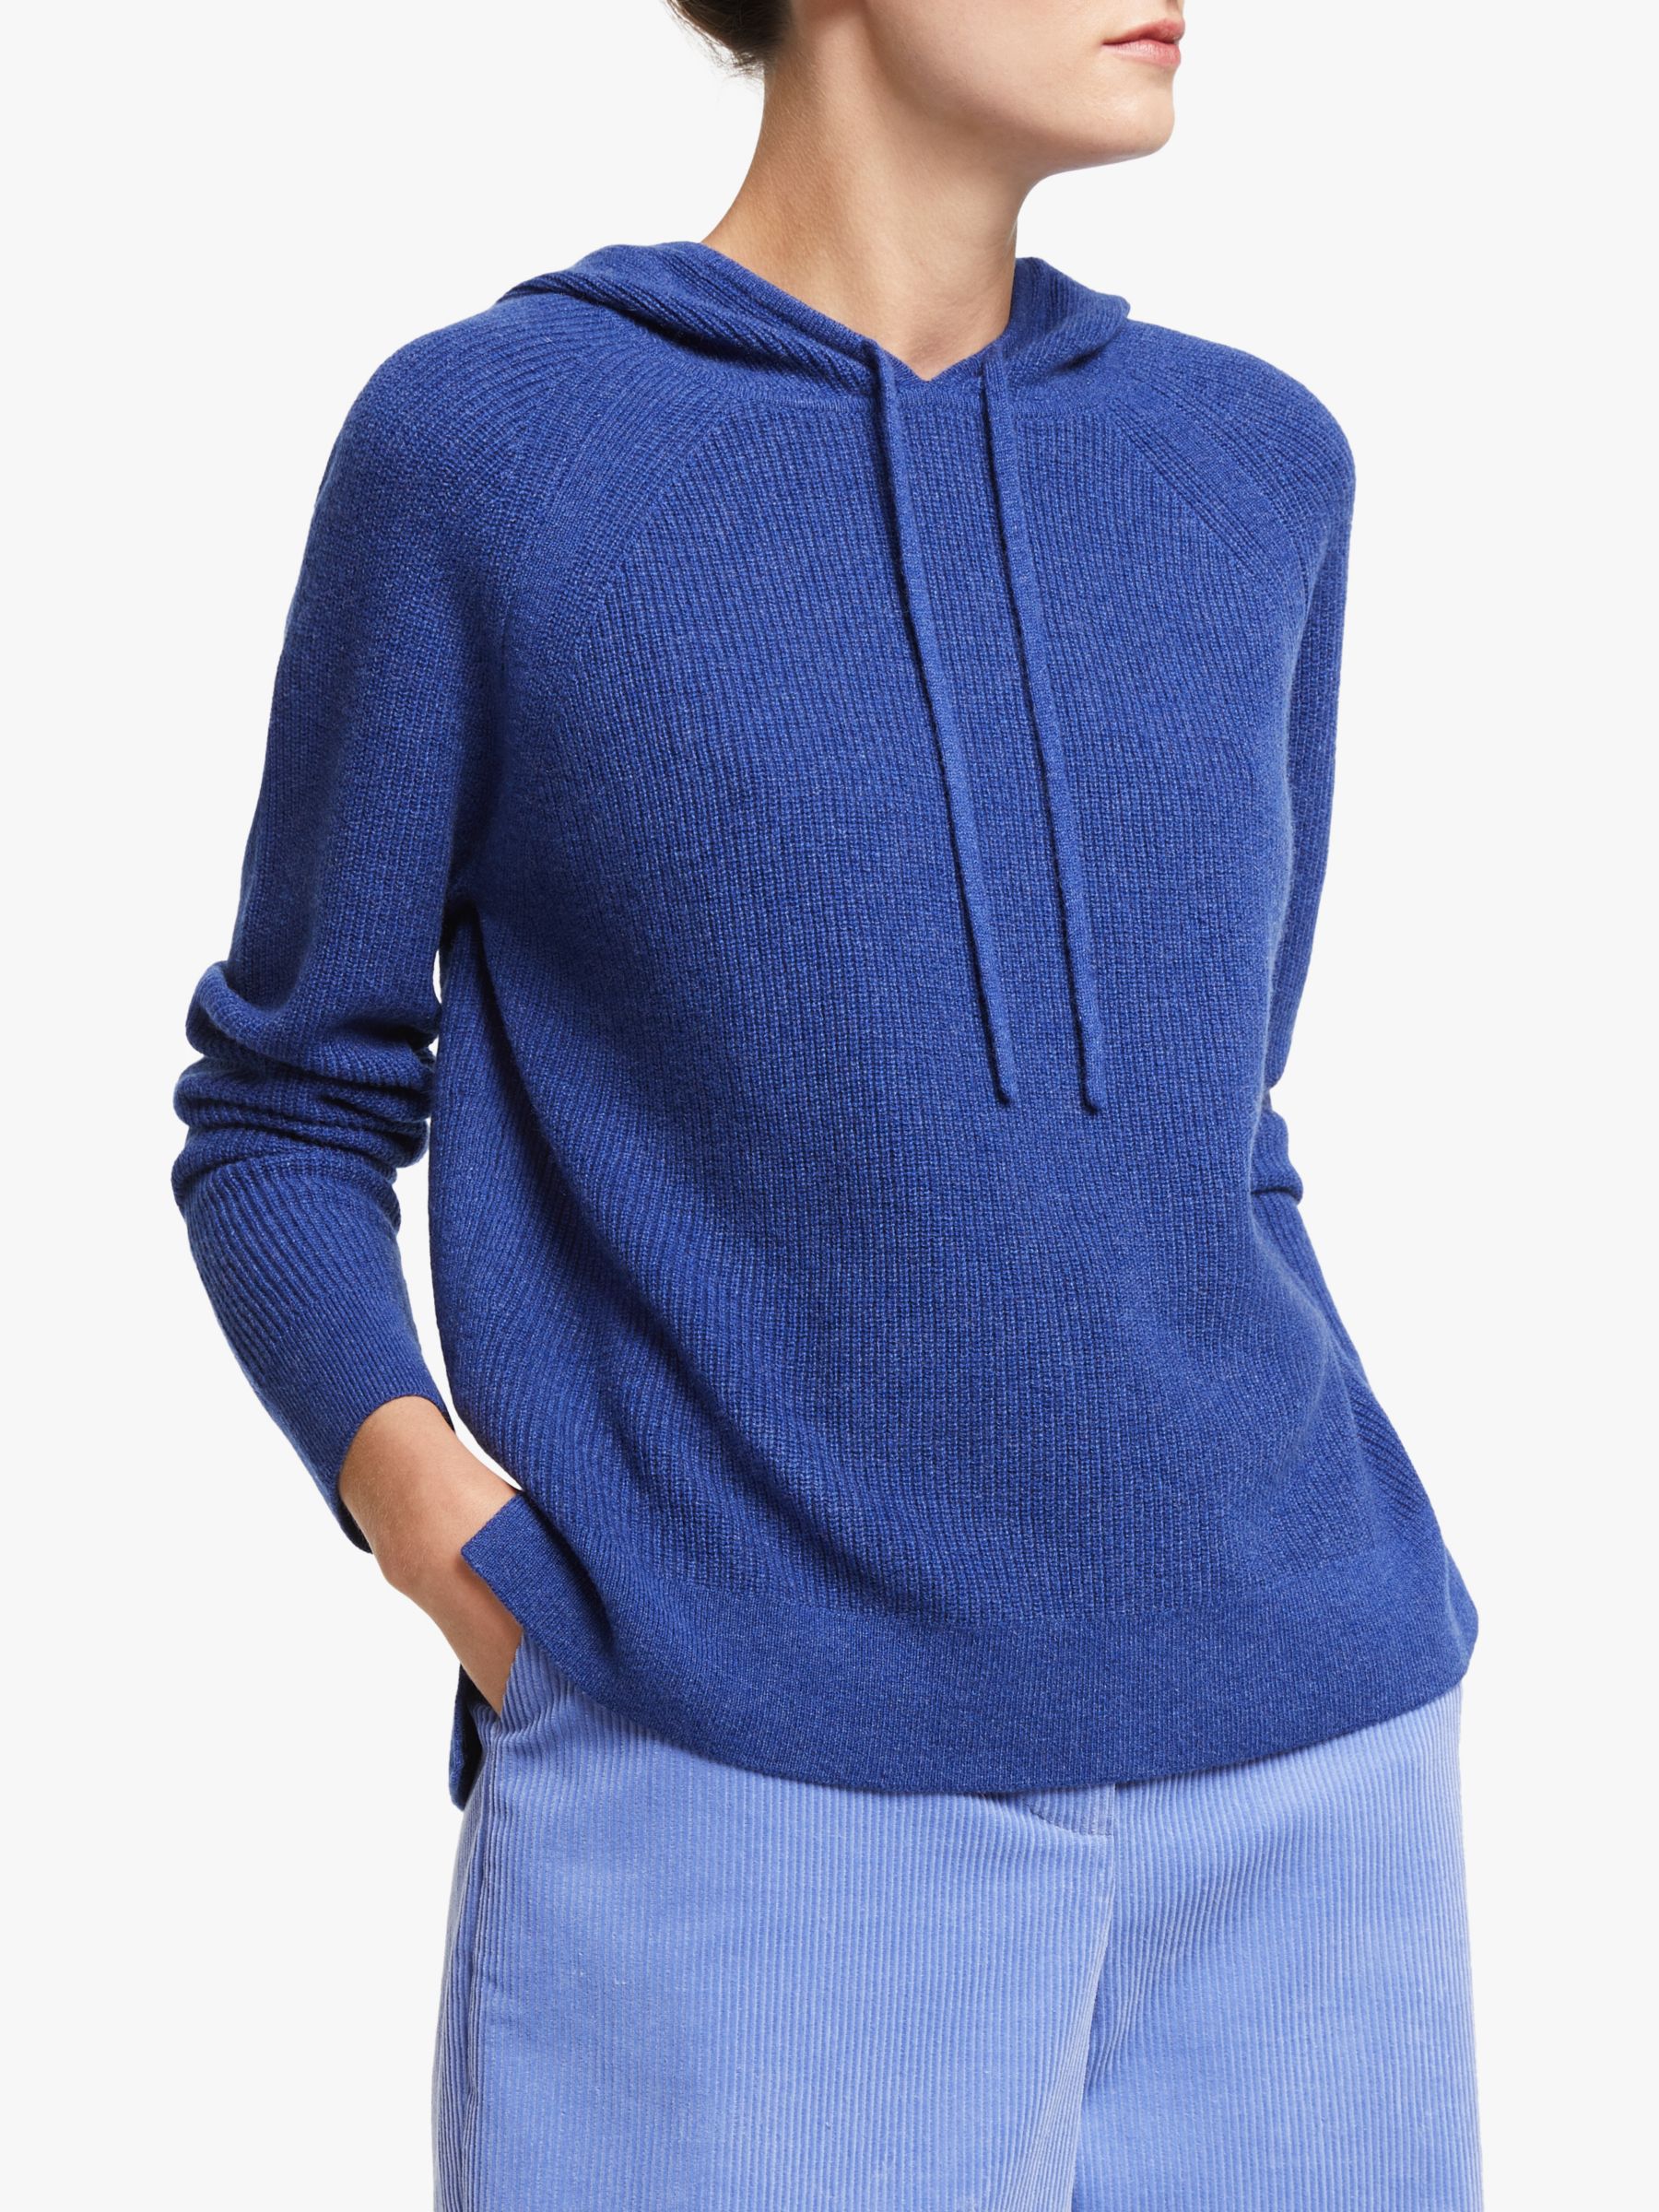 John Lewis & Partners Cashmere Hooded Sweater